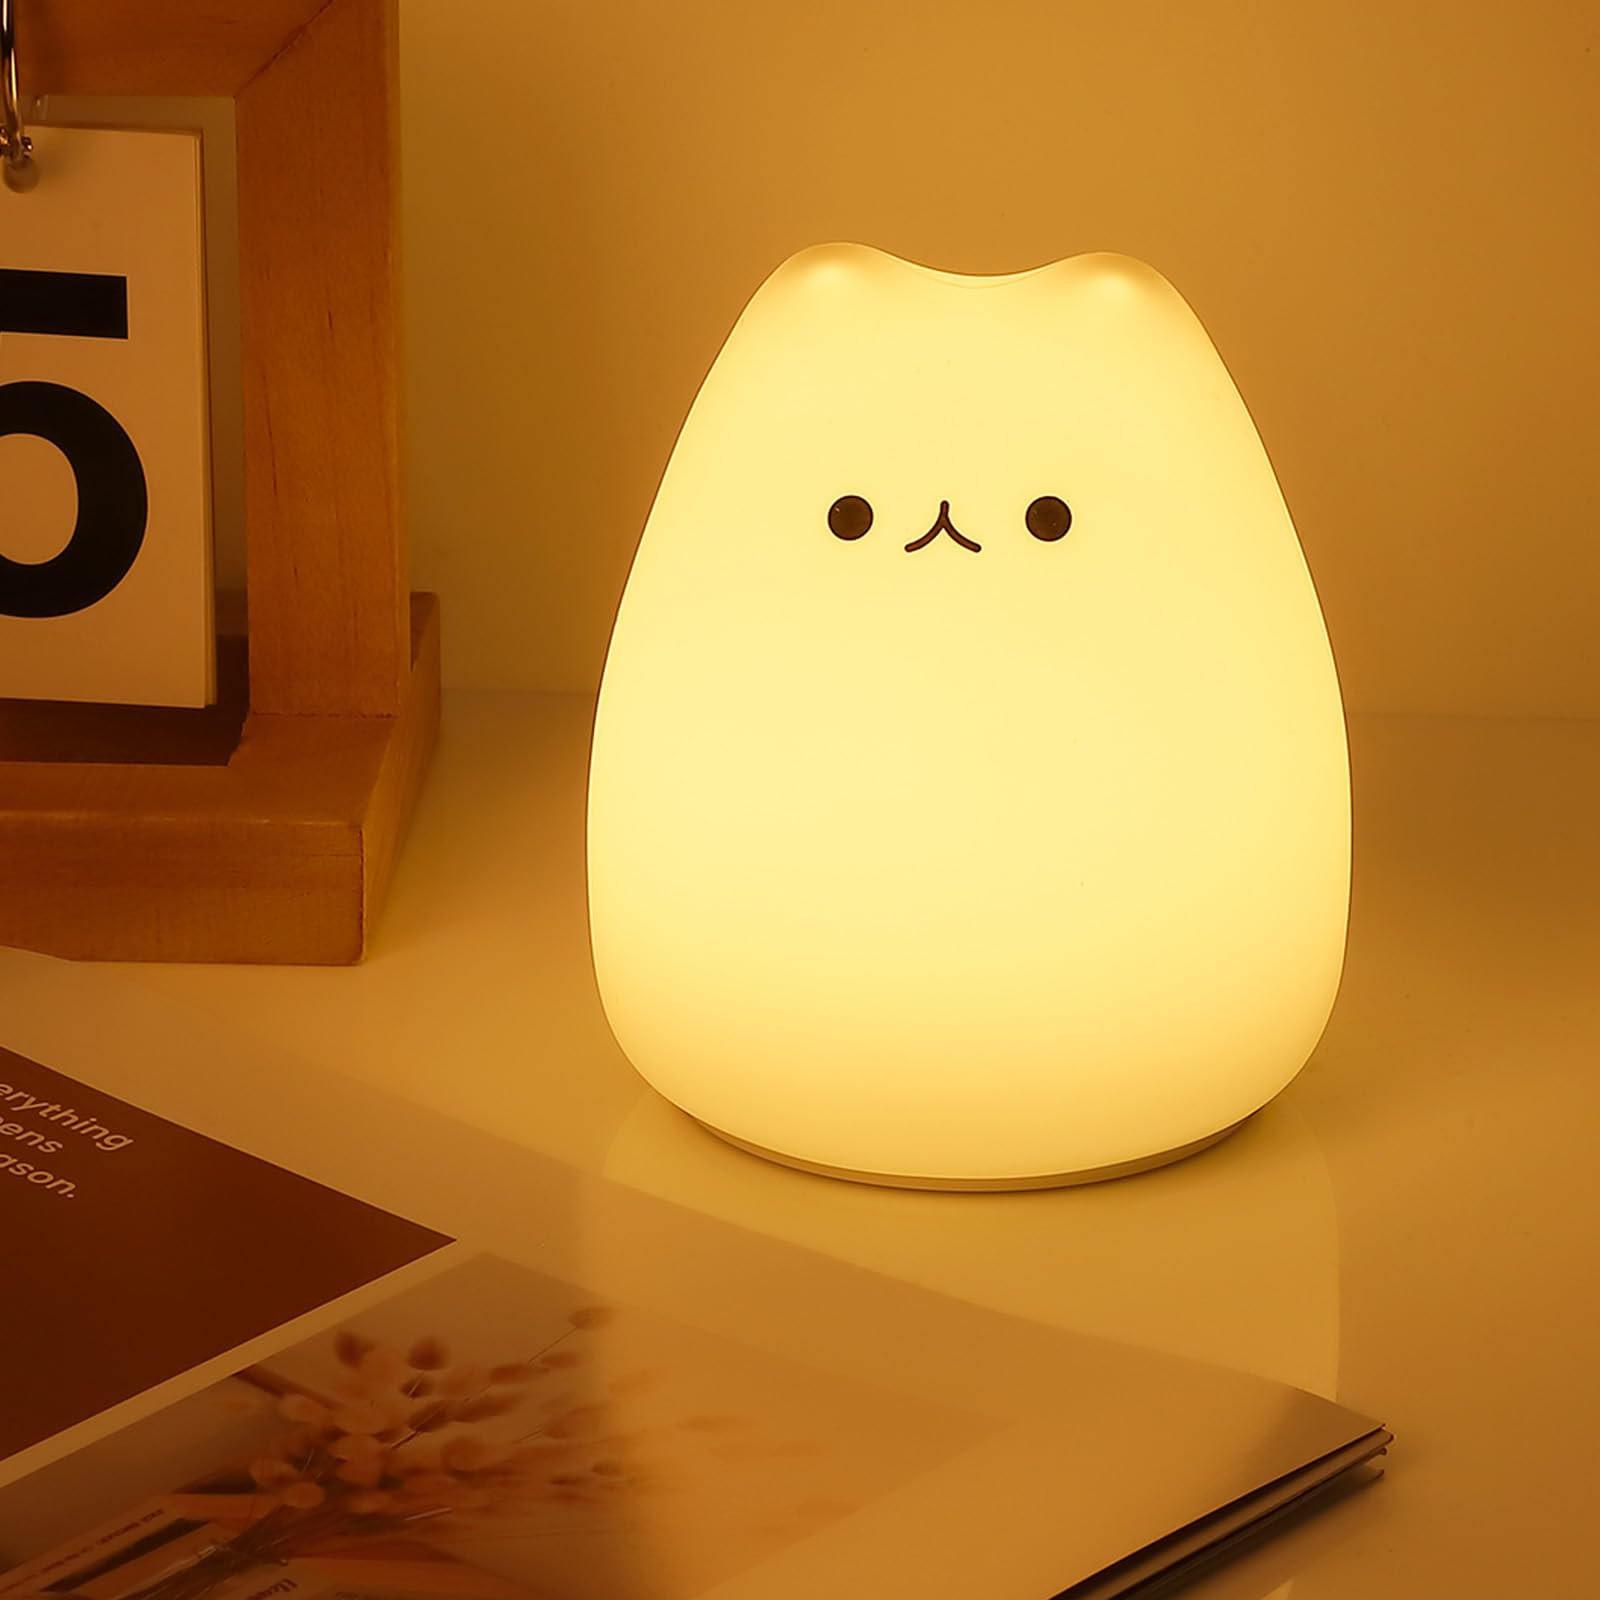 Litake LED Cat Night Light, Battery Powered Kitty Night Light with Tail, Silicone Multicolor Cute Cat Lamp with Warm White and 7-Color Breathing Mode, Gifts for Women Teen Girls Baby